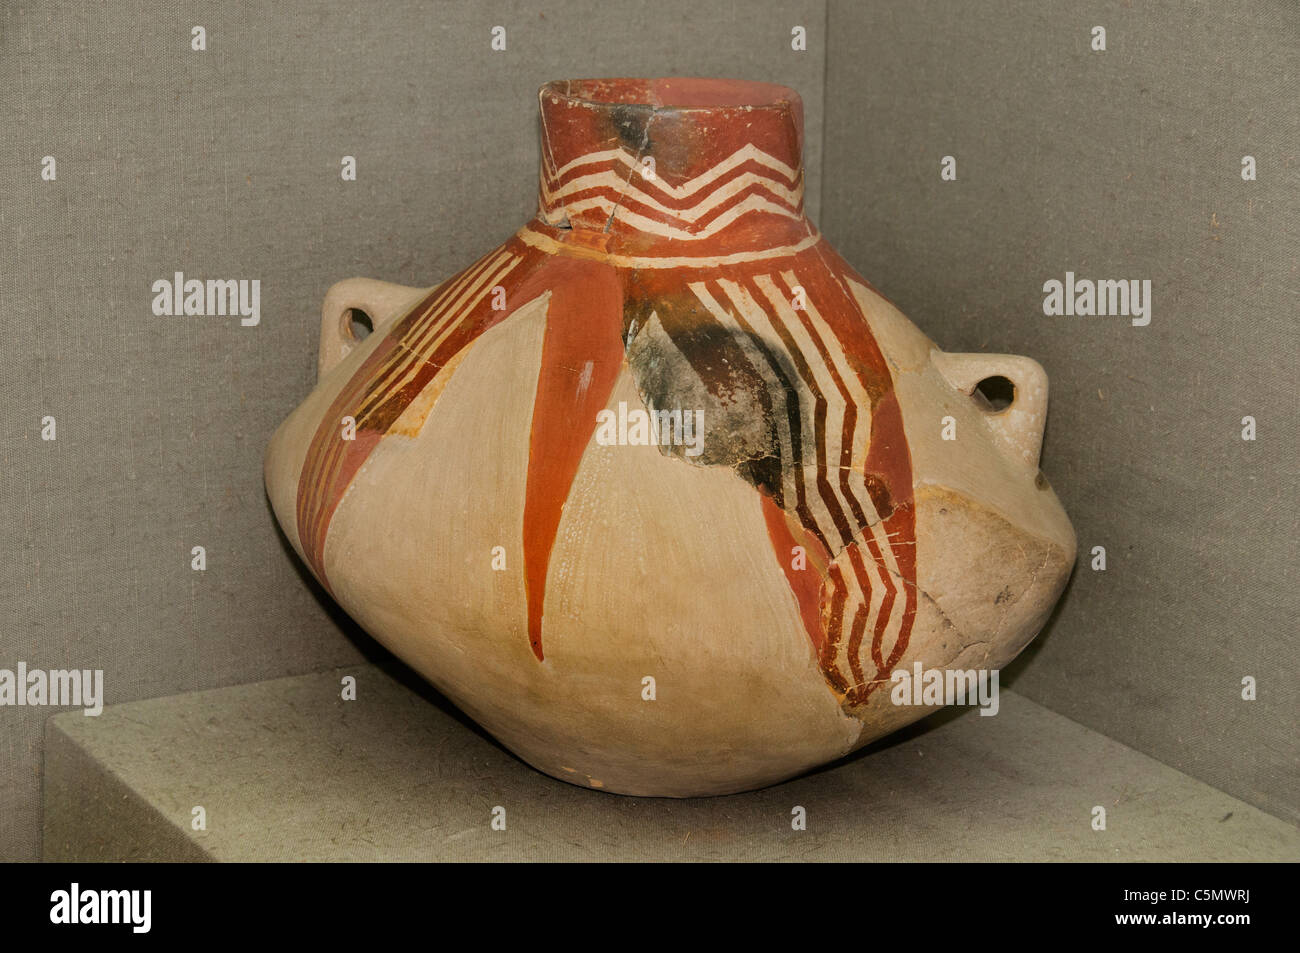 TWO HANDLED PAINTED POT Baked clay Early Chalcolithic Period, second half of 6th millennium B.C. Hacilar/Burdur  Turkey Stock Photo